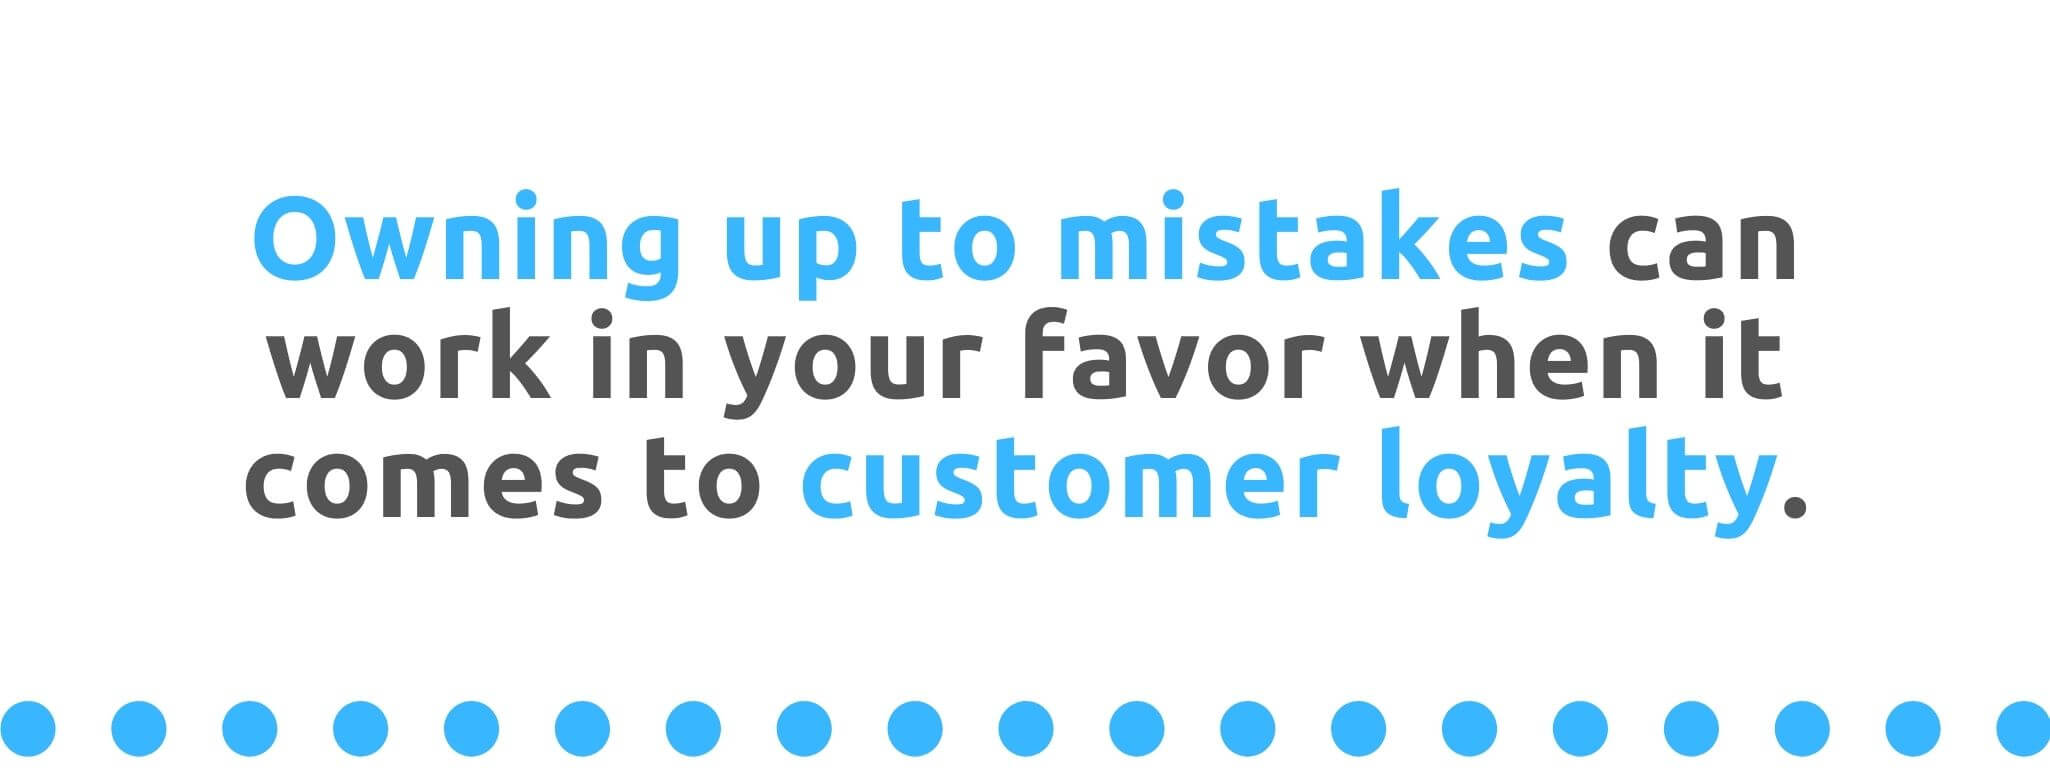 Owning up to mistakes can work in your favor when it comes to customer loyalty - 21 Ways to Encourage Customer Loyalty - Replyco